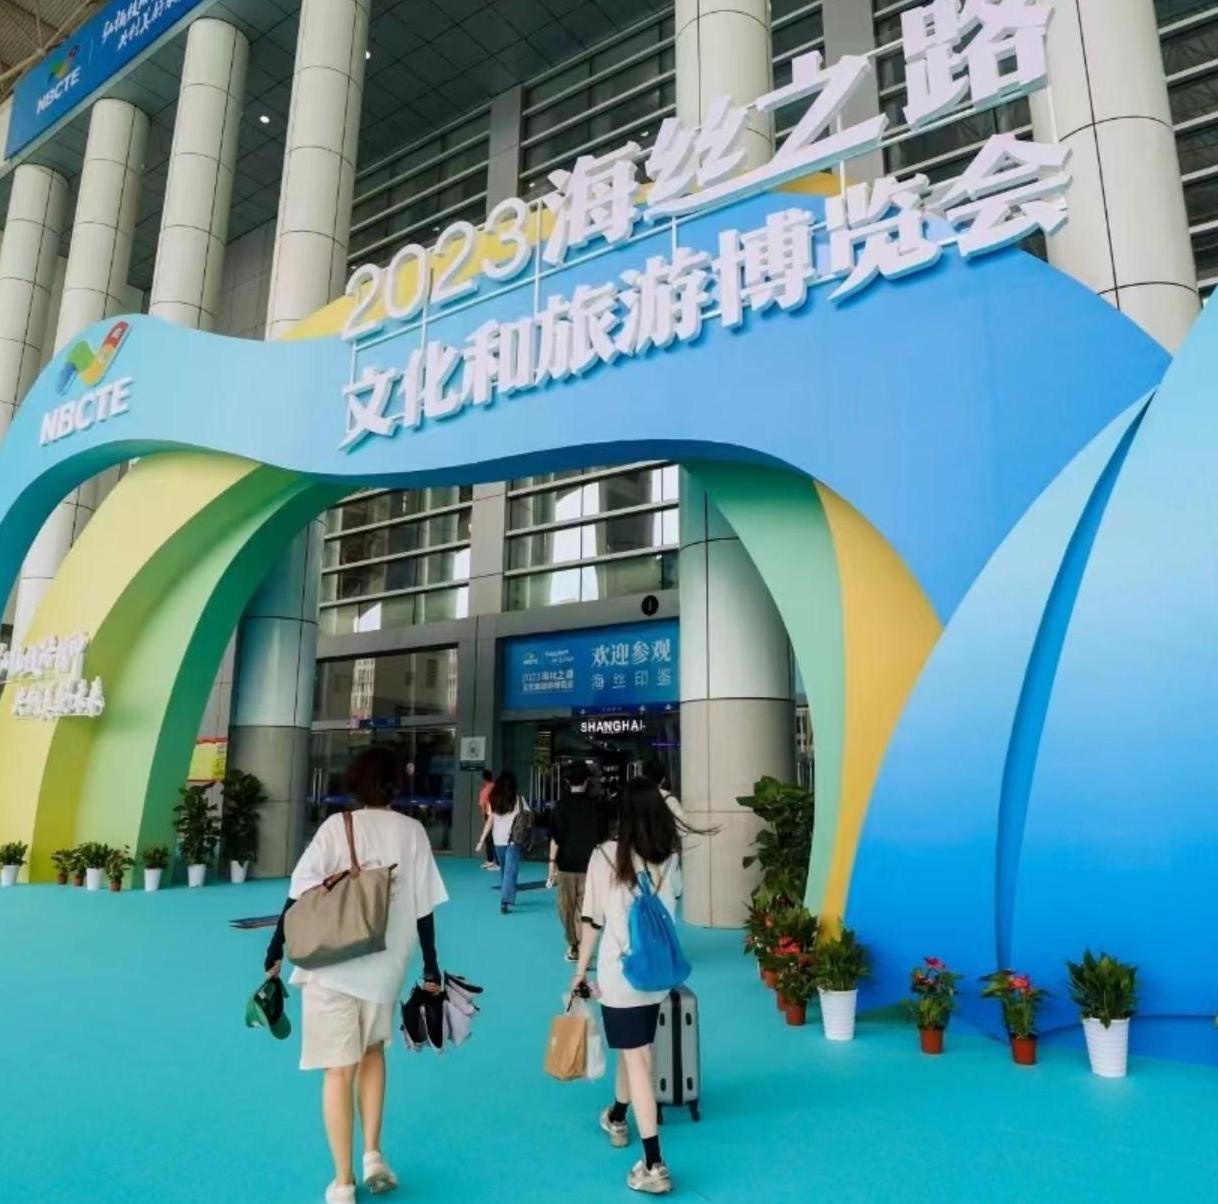 Maritime Silk Road Culture and Tourism Expo held